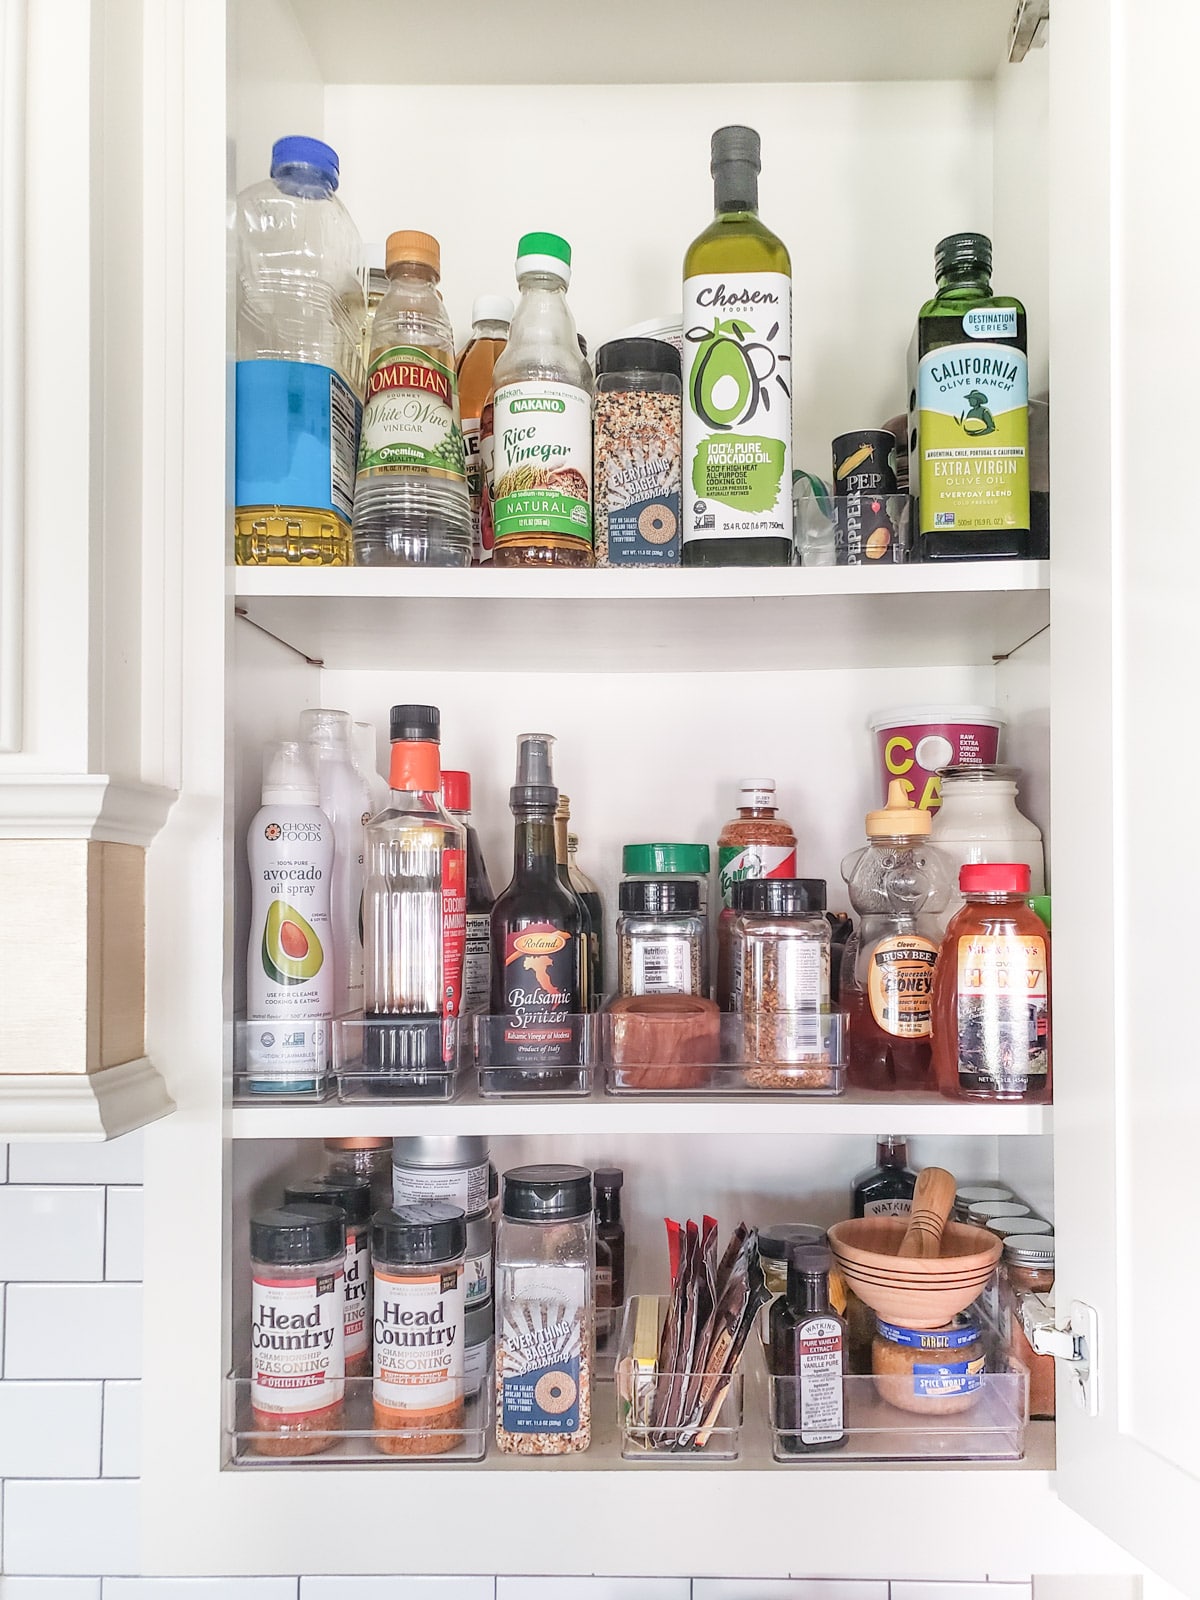 How to Stock a Pantry, Fridge, and Freezer with a Pantry Staples List - Polished Habitat